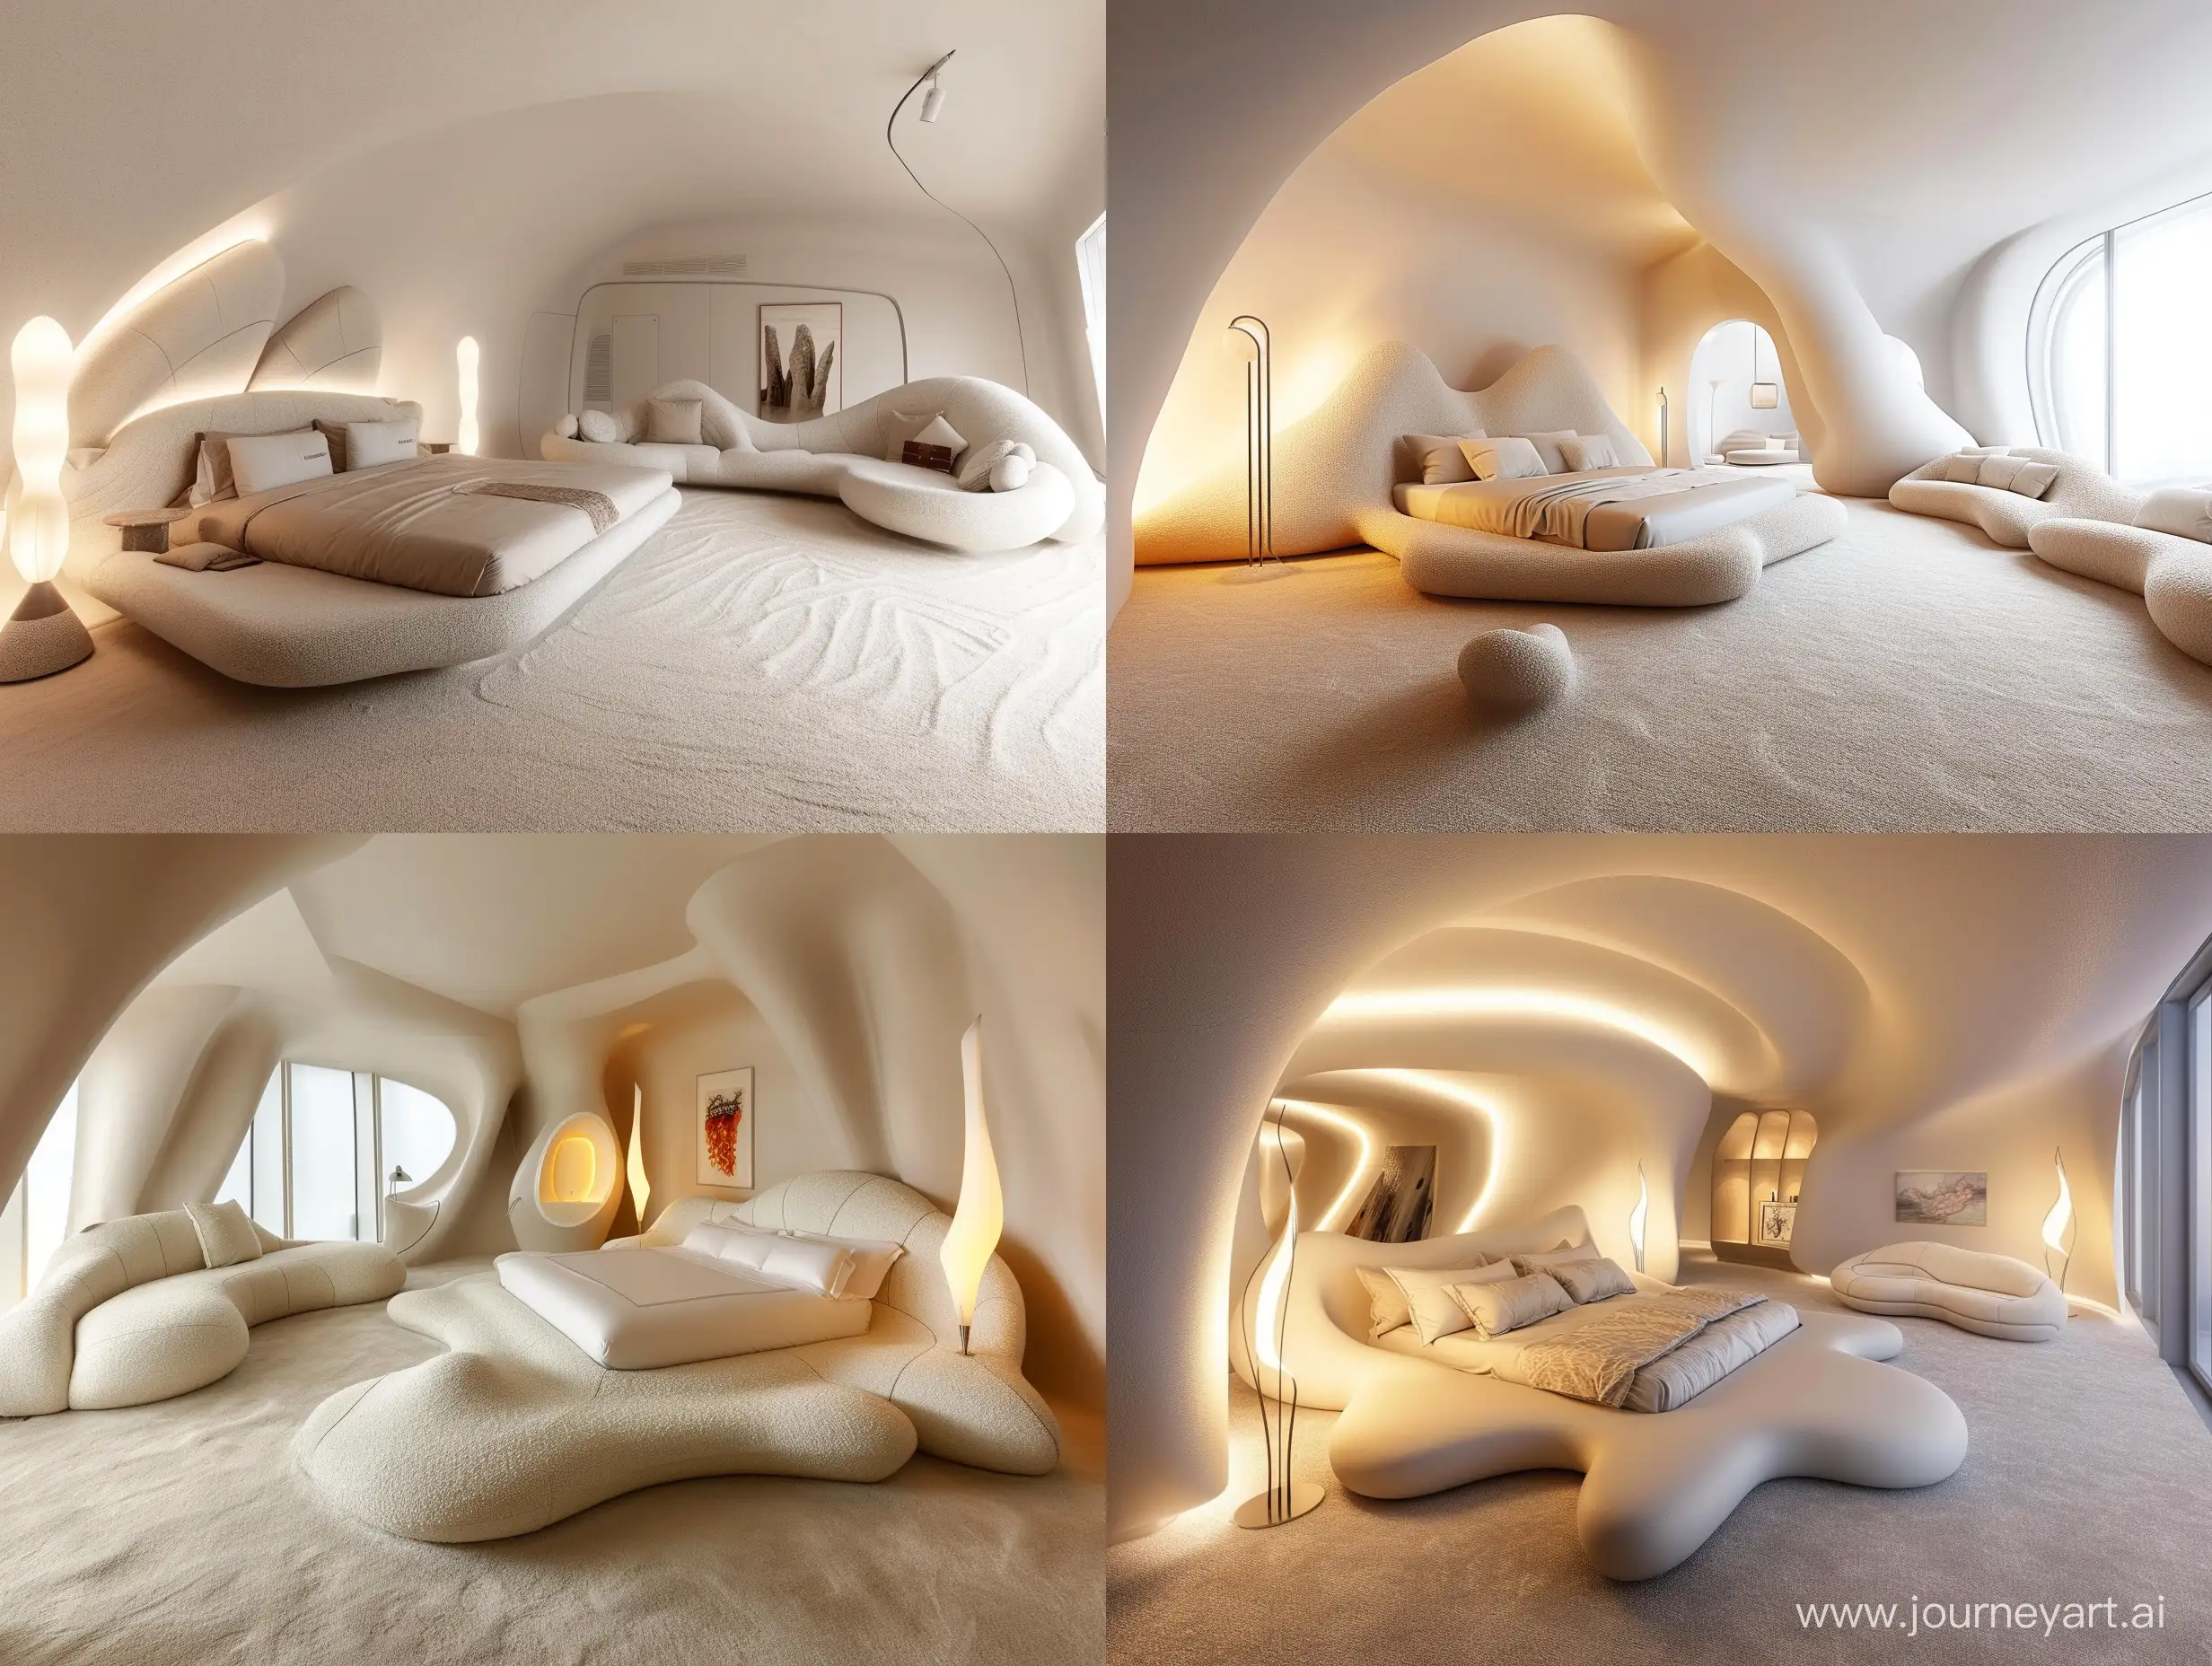 Zaha-Hadid-Inspired-Bedroom-10x20m-Elegance-with-King-Bed-and-Sculpted-Sofas